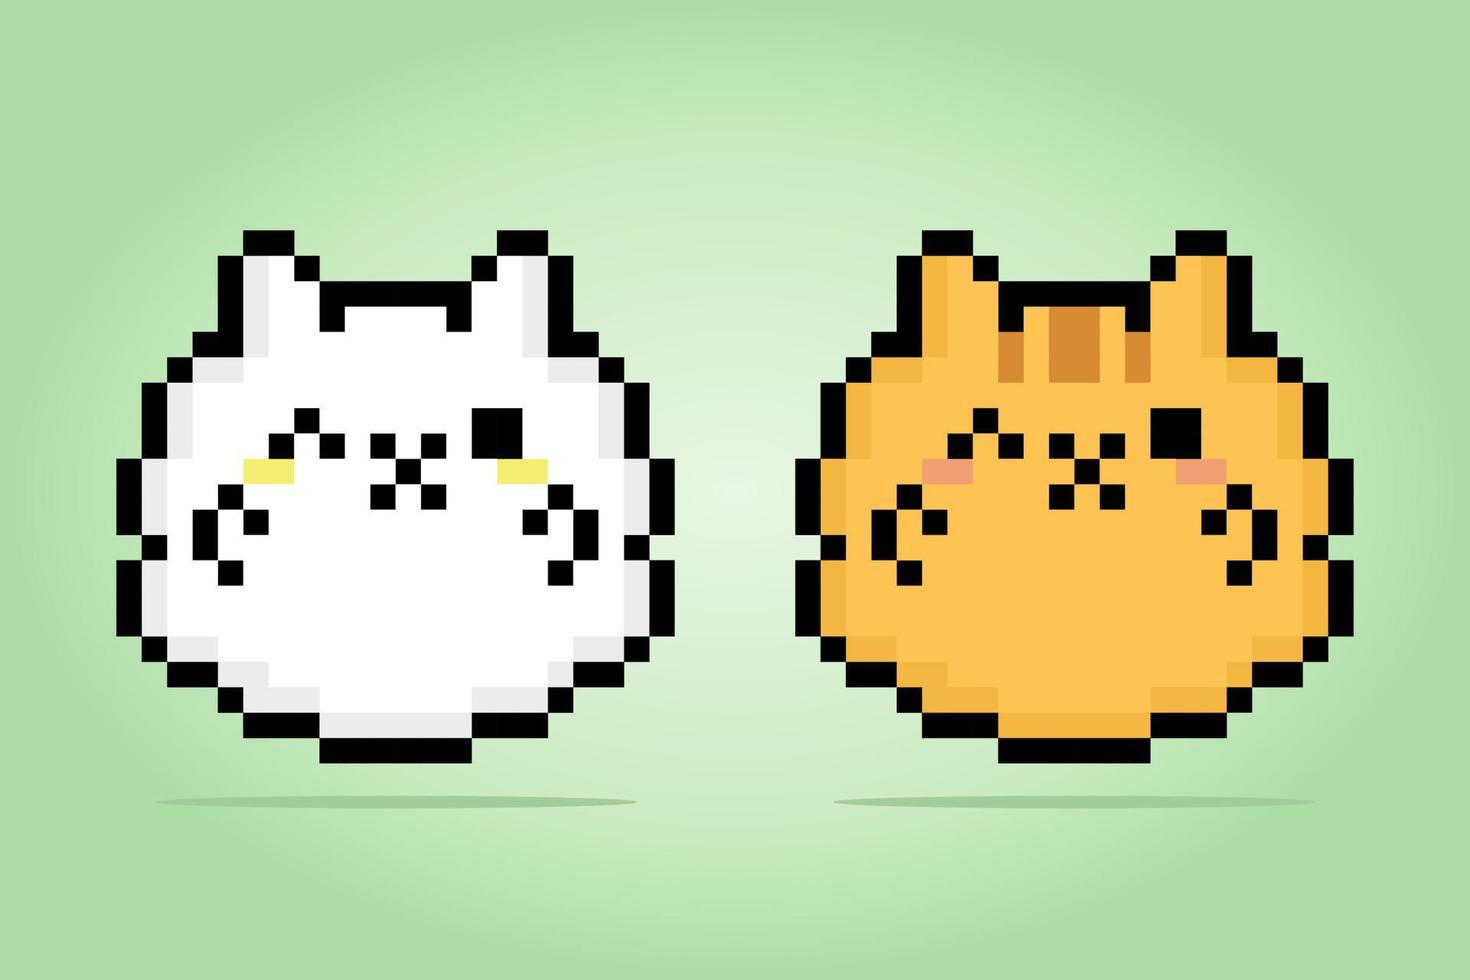 Pixel 8 bit of fat cat. Animals for game assets in vector illustration.